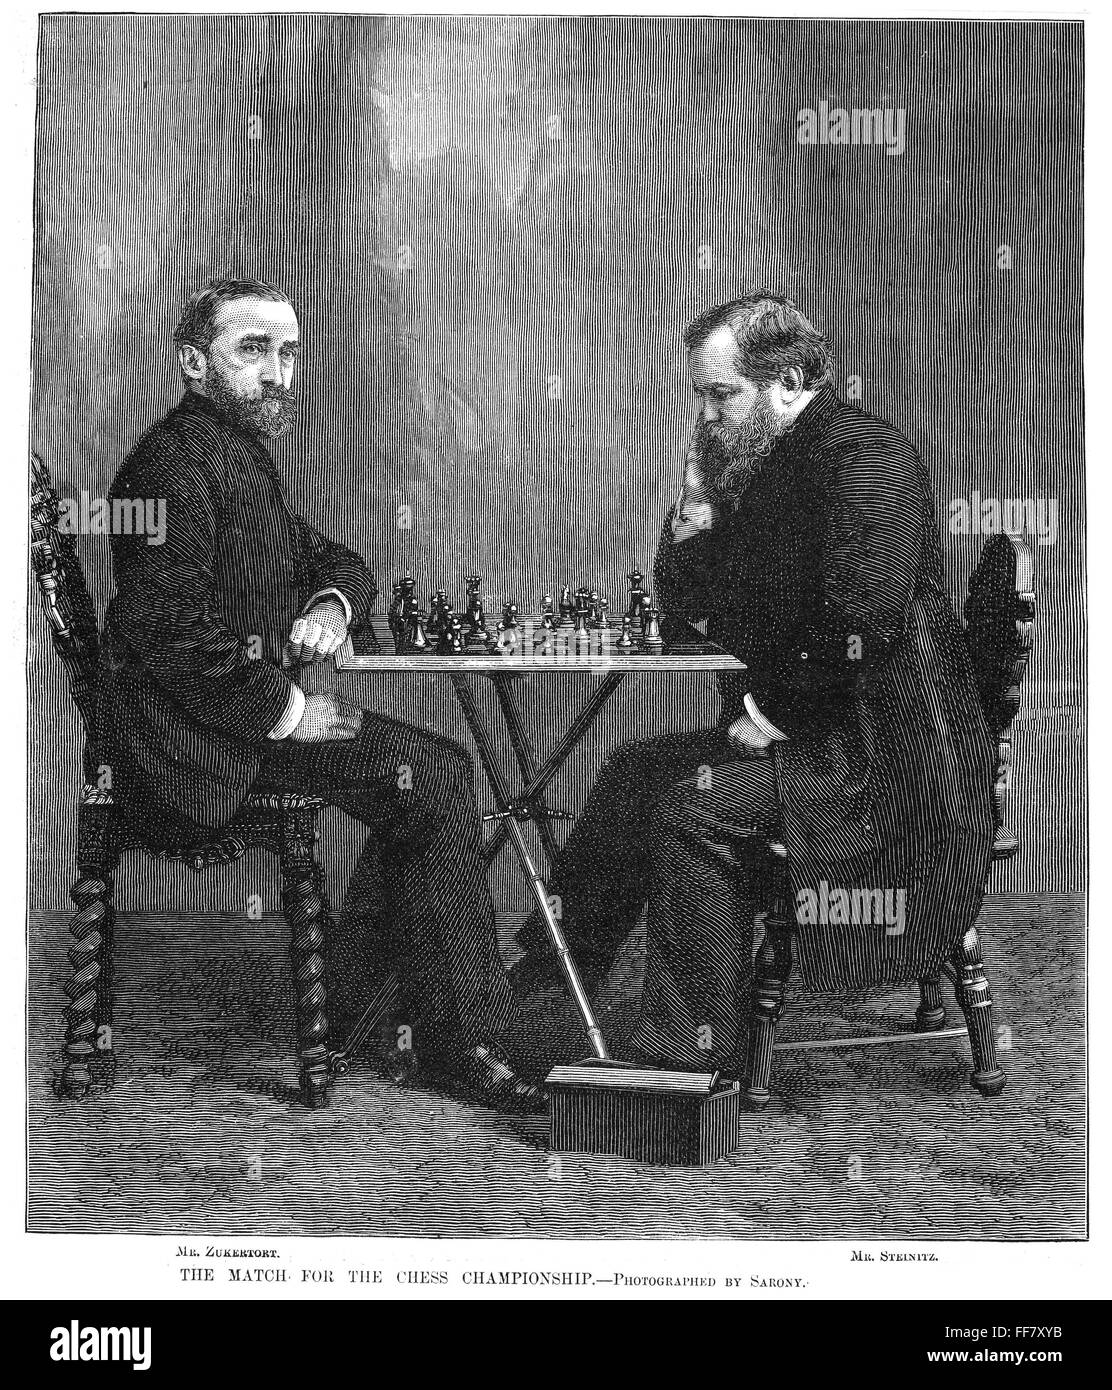 FollowChess on X: The first-ever World Chess Championship began #OnThisDay  in 1886. The match started off with a Steinitz win, but Zukertort hit back  with 4 successive victories. In the next 15